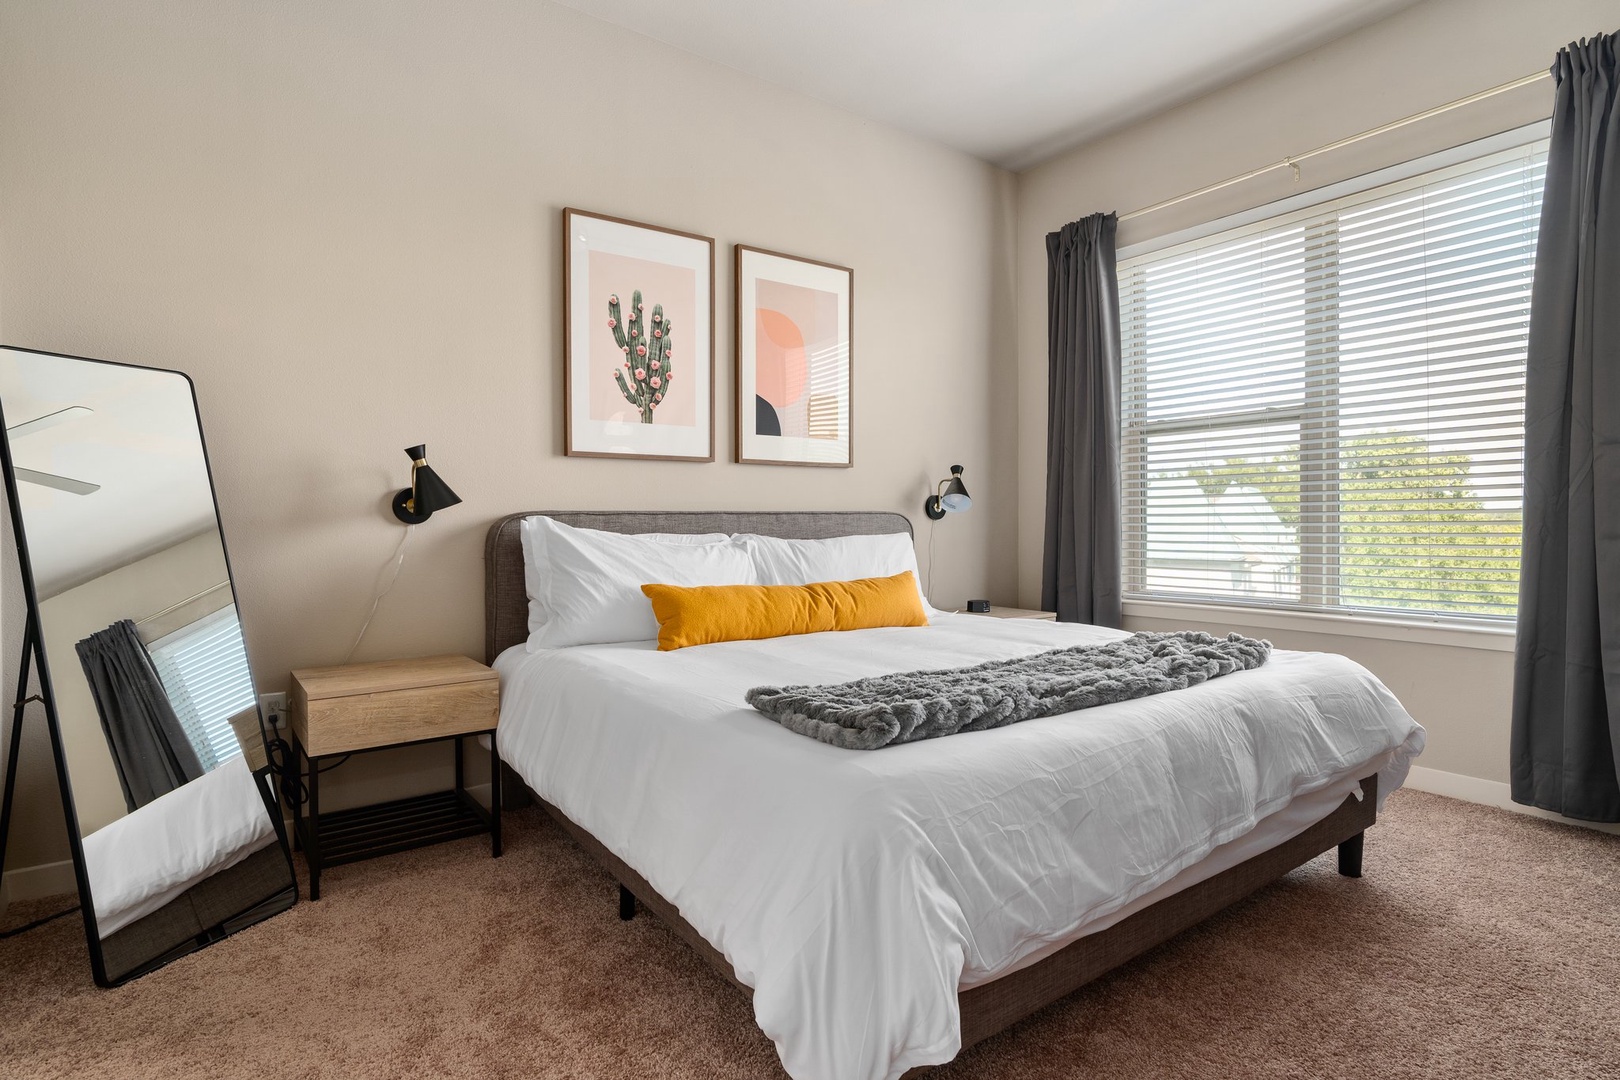 Find bliss on a memory foam bed in this comfortable bedroom.